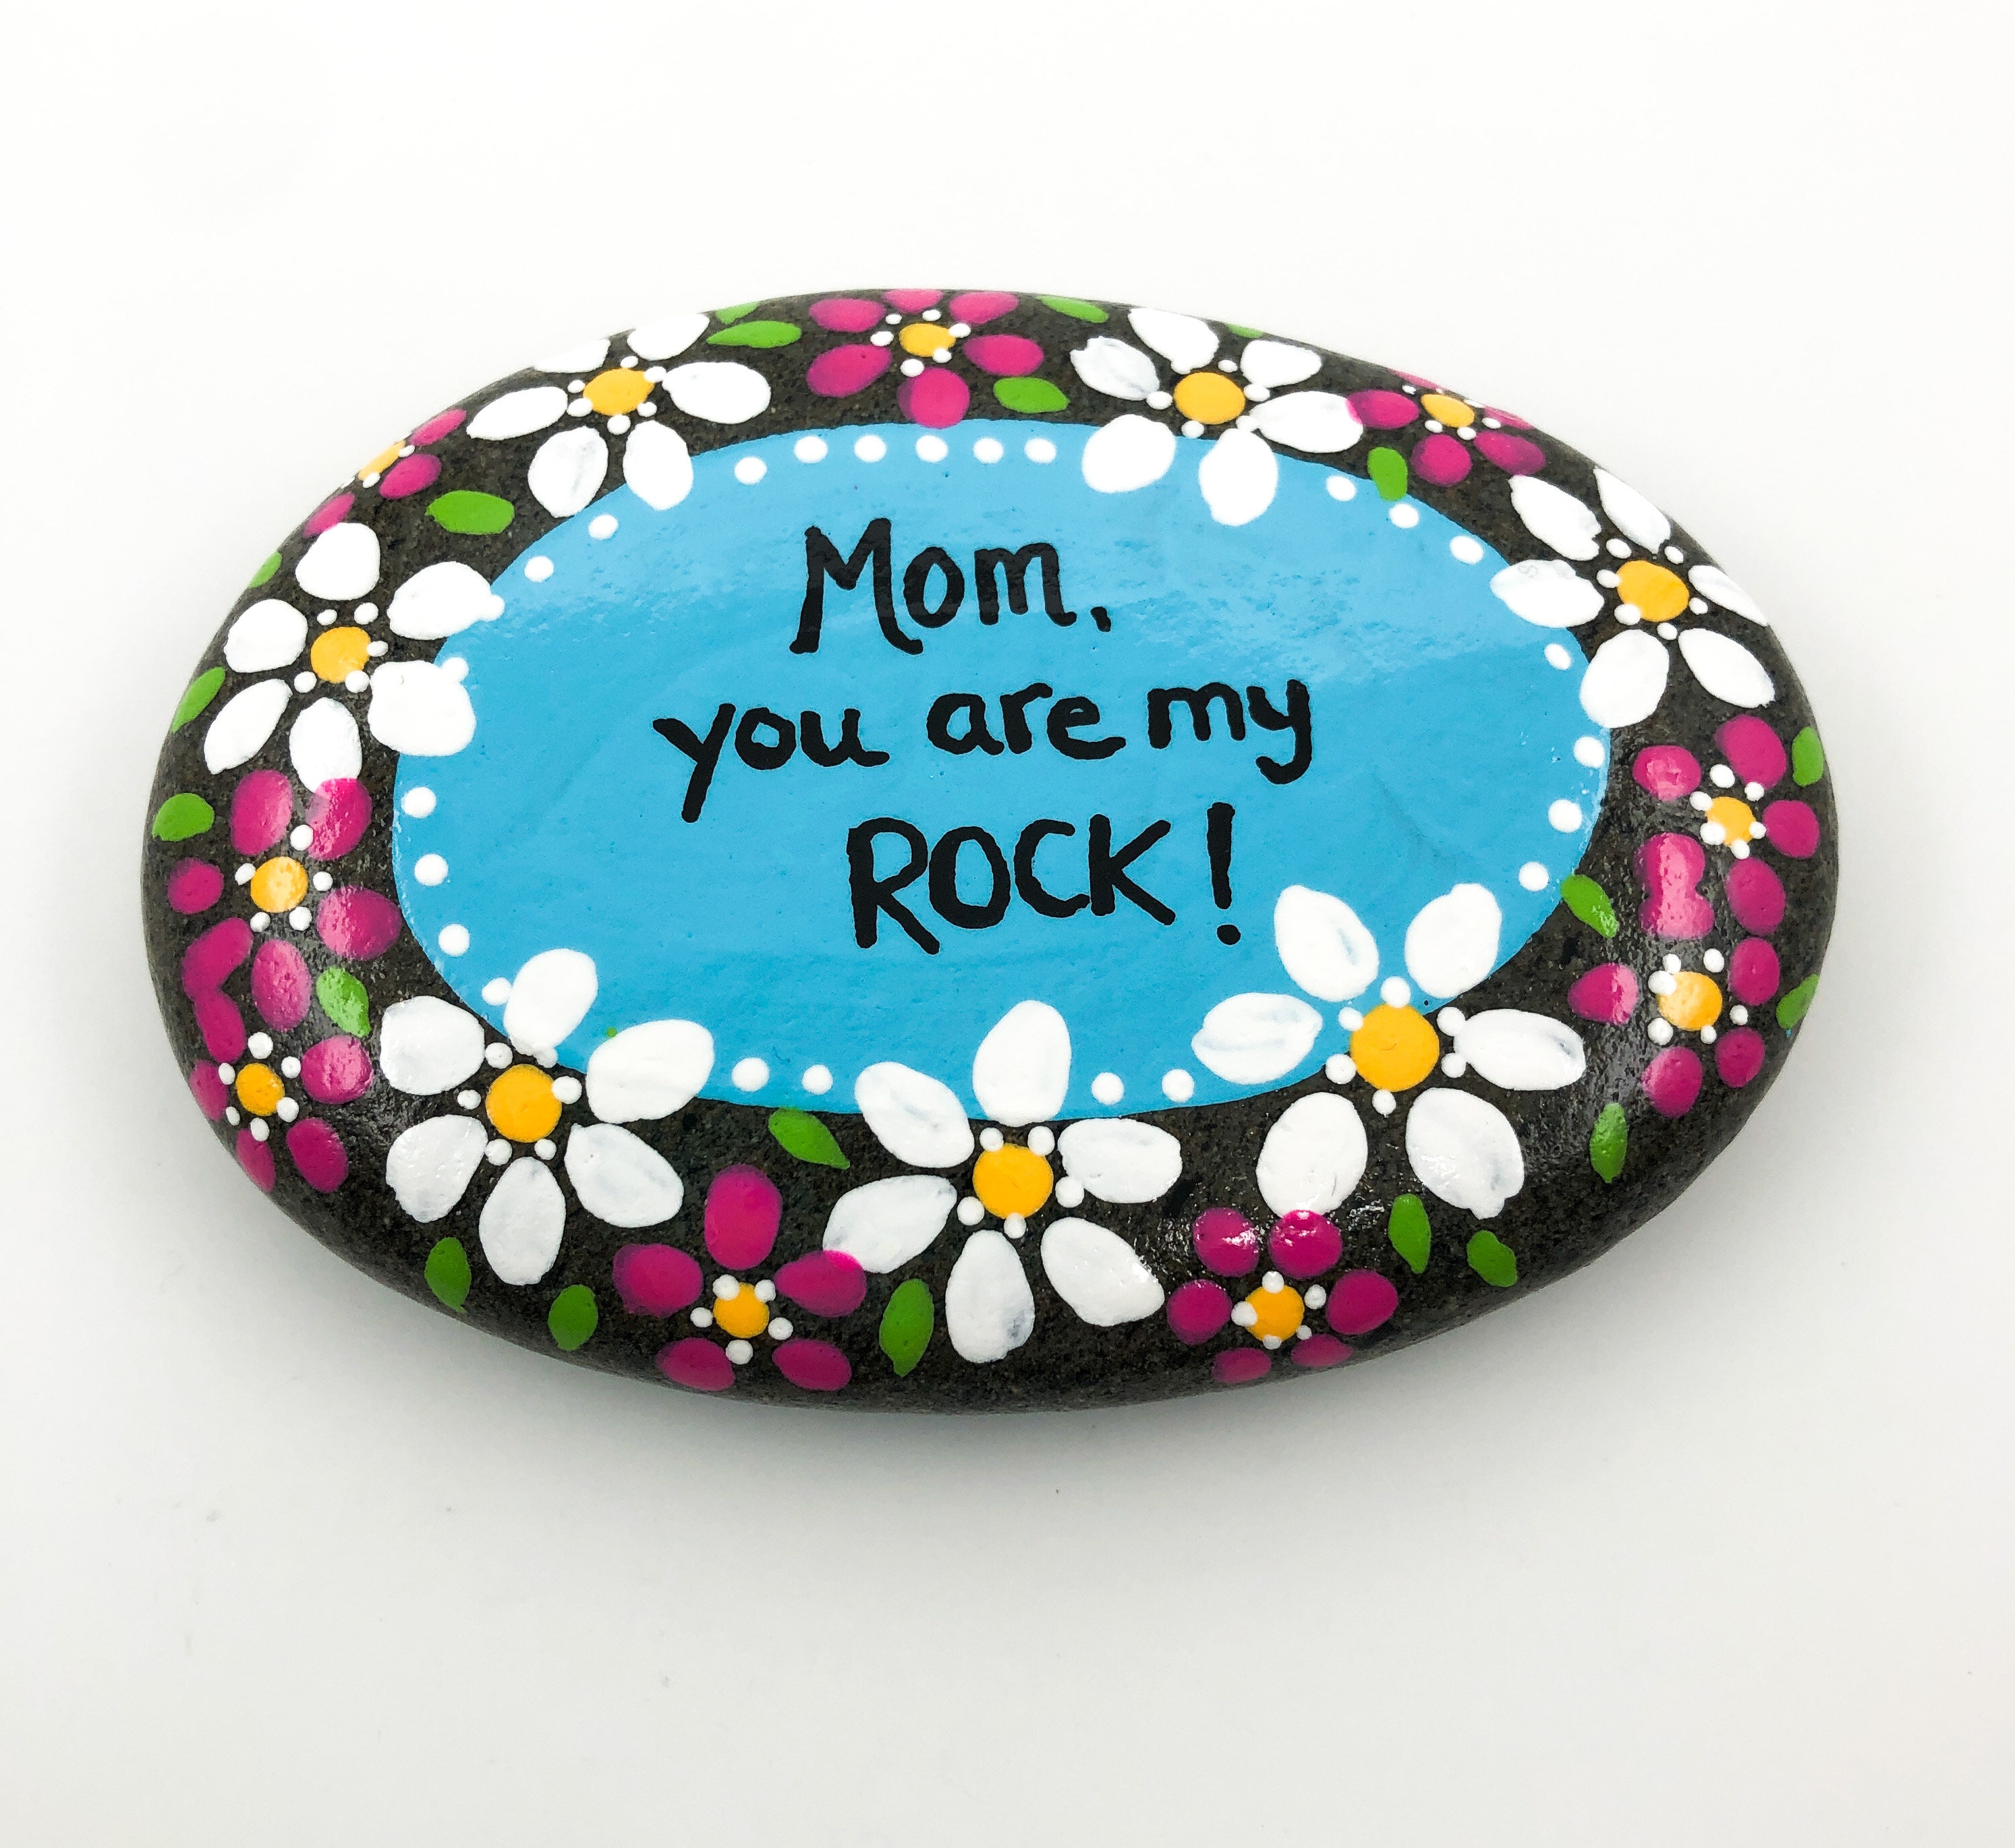 Unique Gift for Mom - Thank You for Being My Rock, Christmas Mothers Day  Birthday Gifts for Mother from Daughter Son Kids, Novelty Keepsake  Paperweight Pebble Stone Engraved Rock with Sentiment Words 